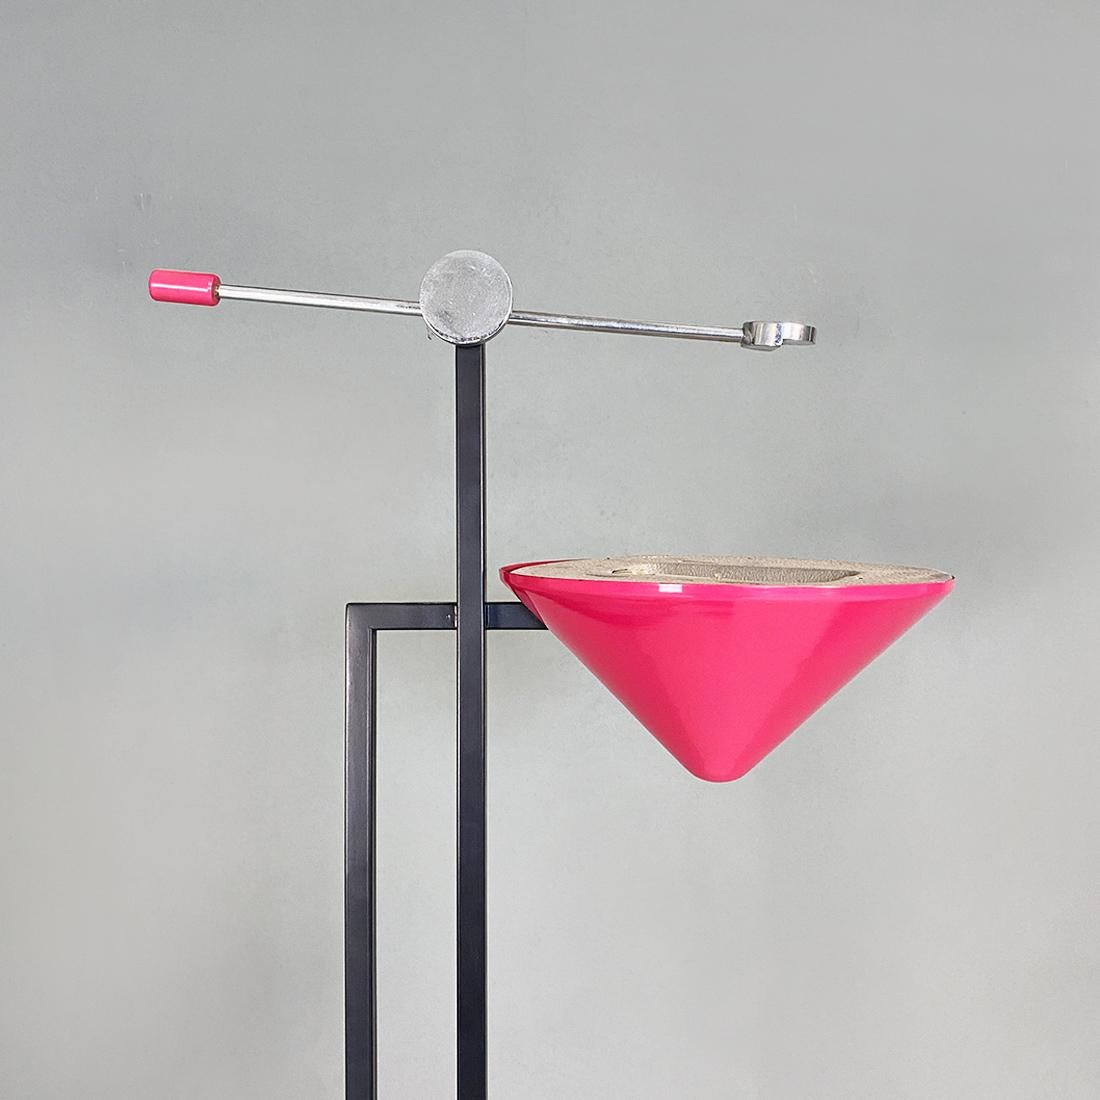 Italian Modern Metal Structure and Magenta Conical Diffuser Floor Lamp, 1980s For Sale 3